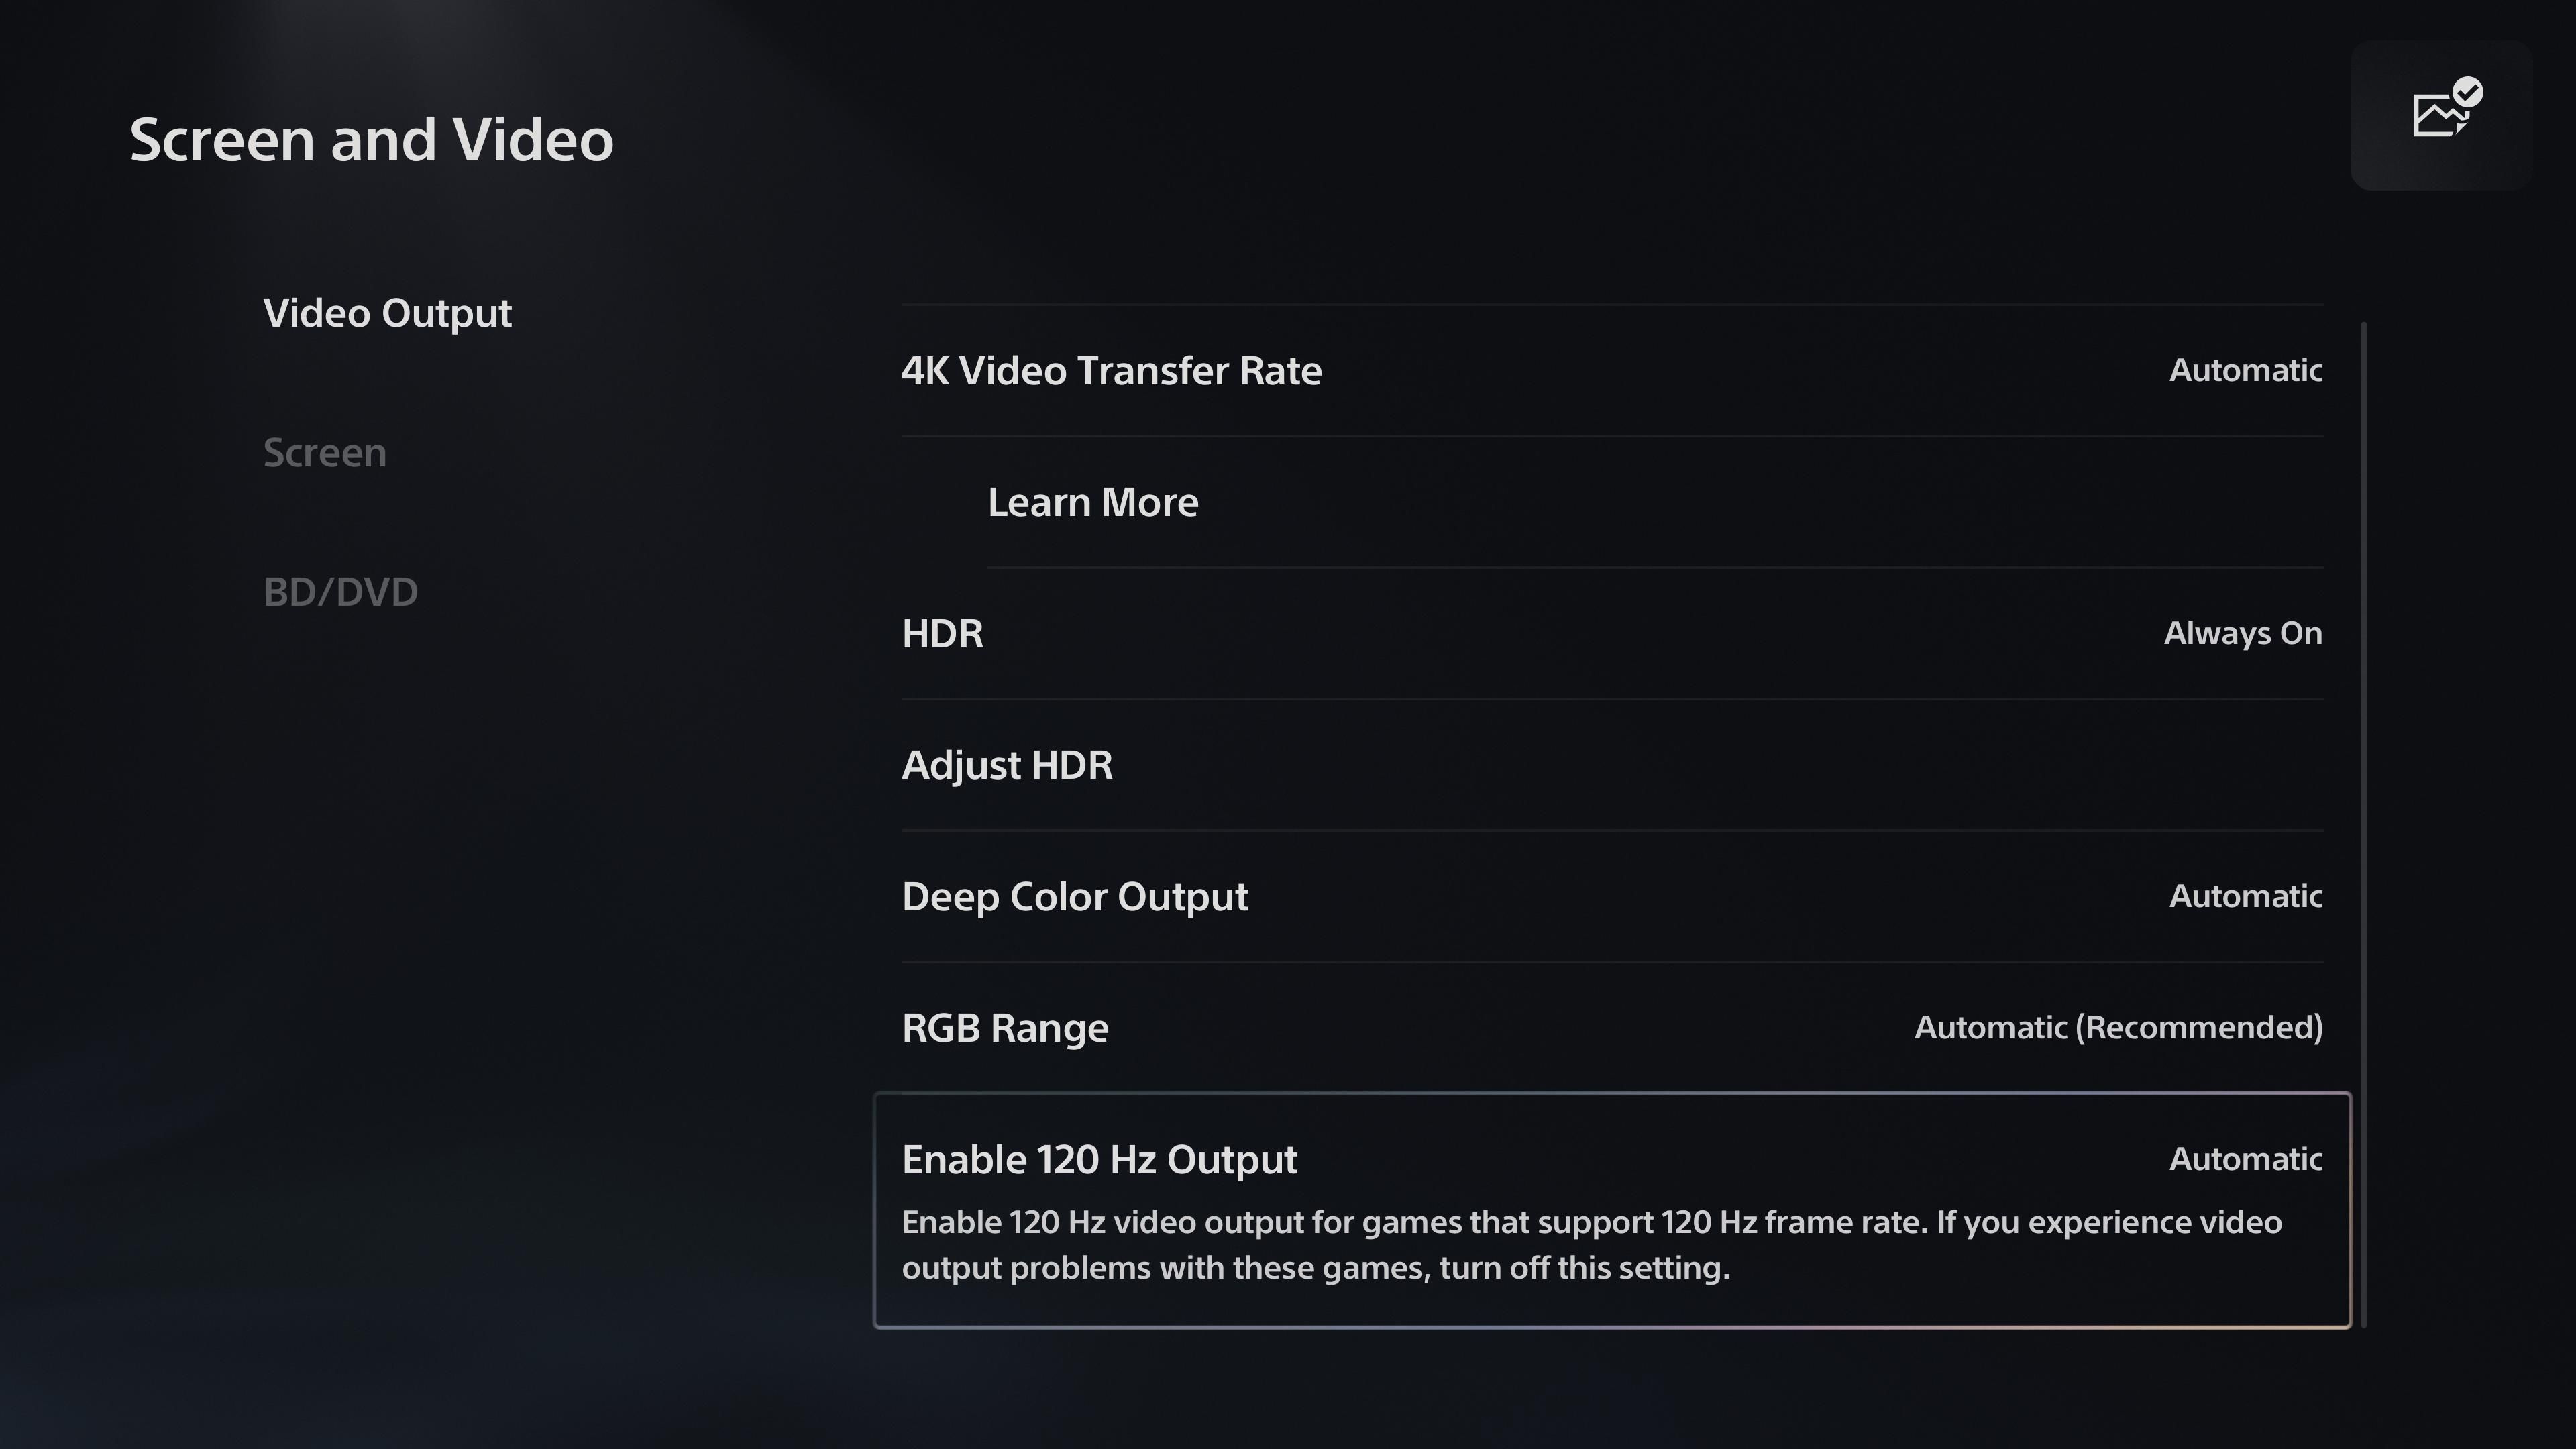 How to Enable 120Hz Output on PS5